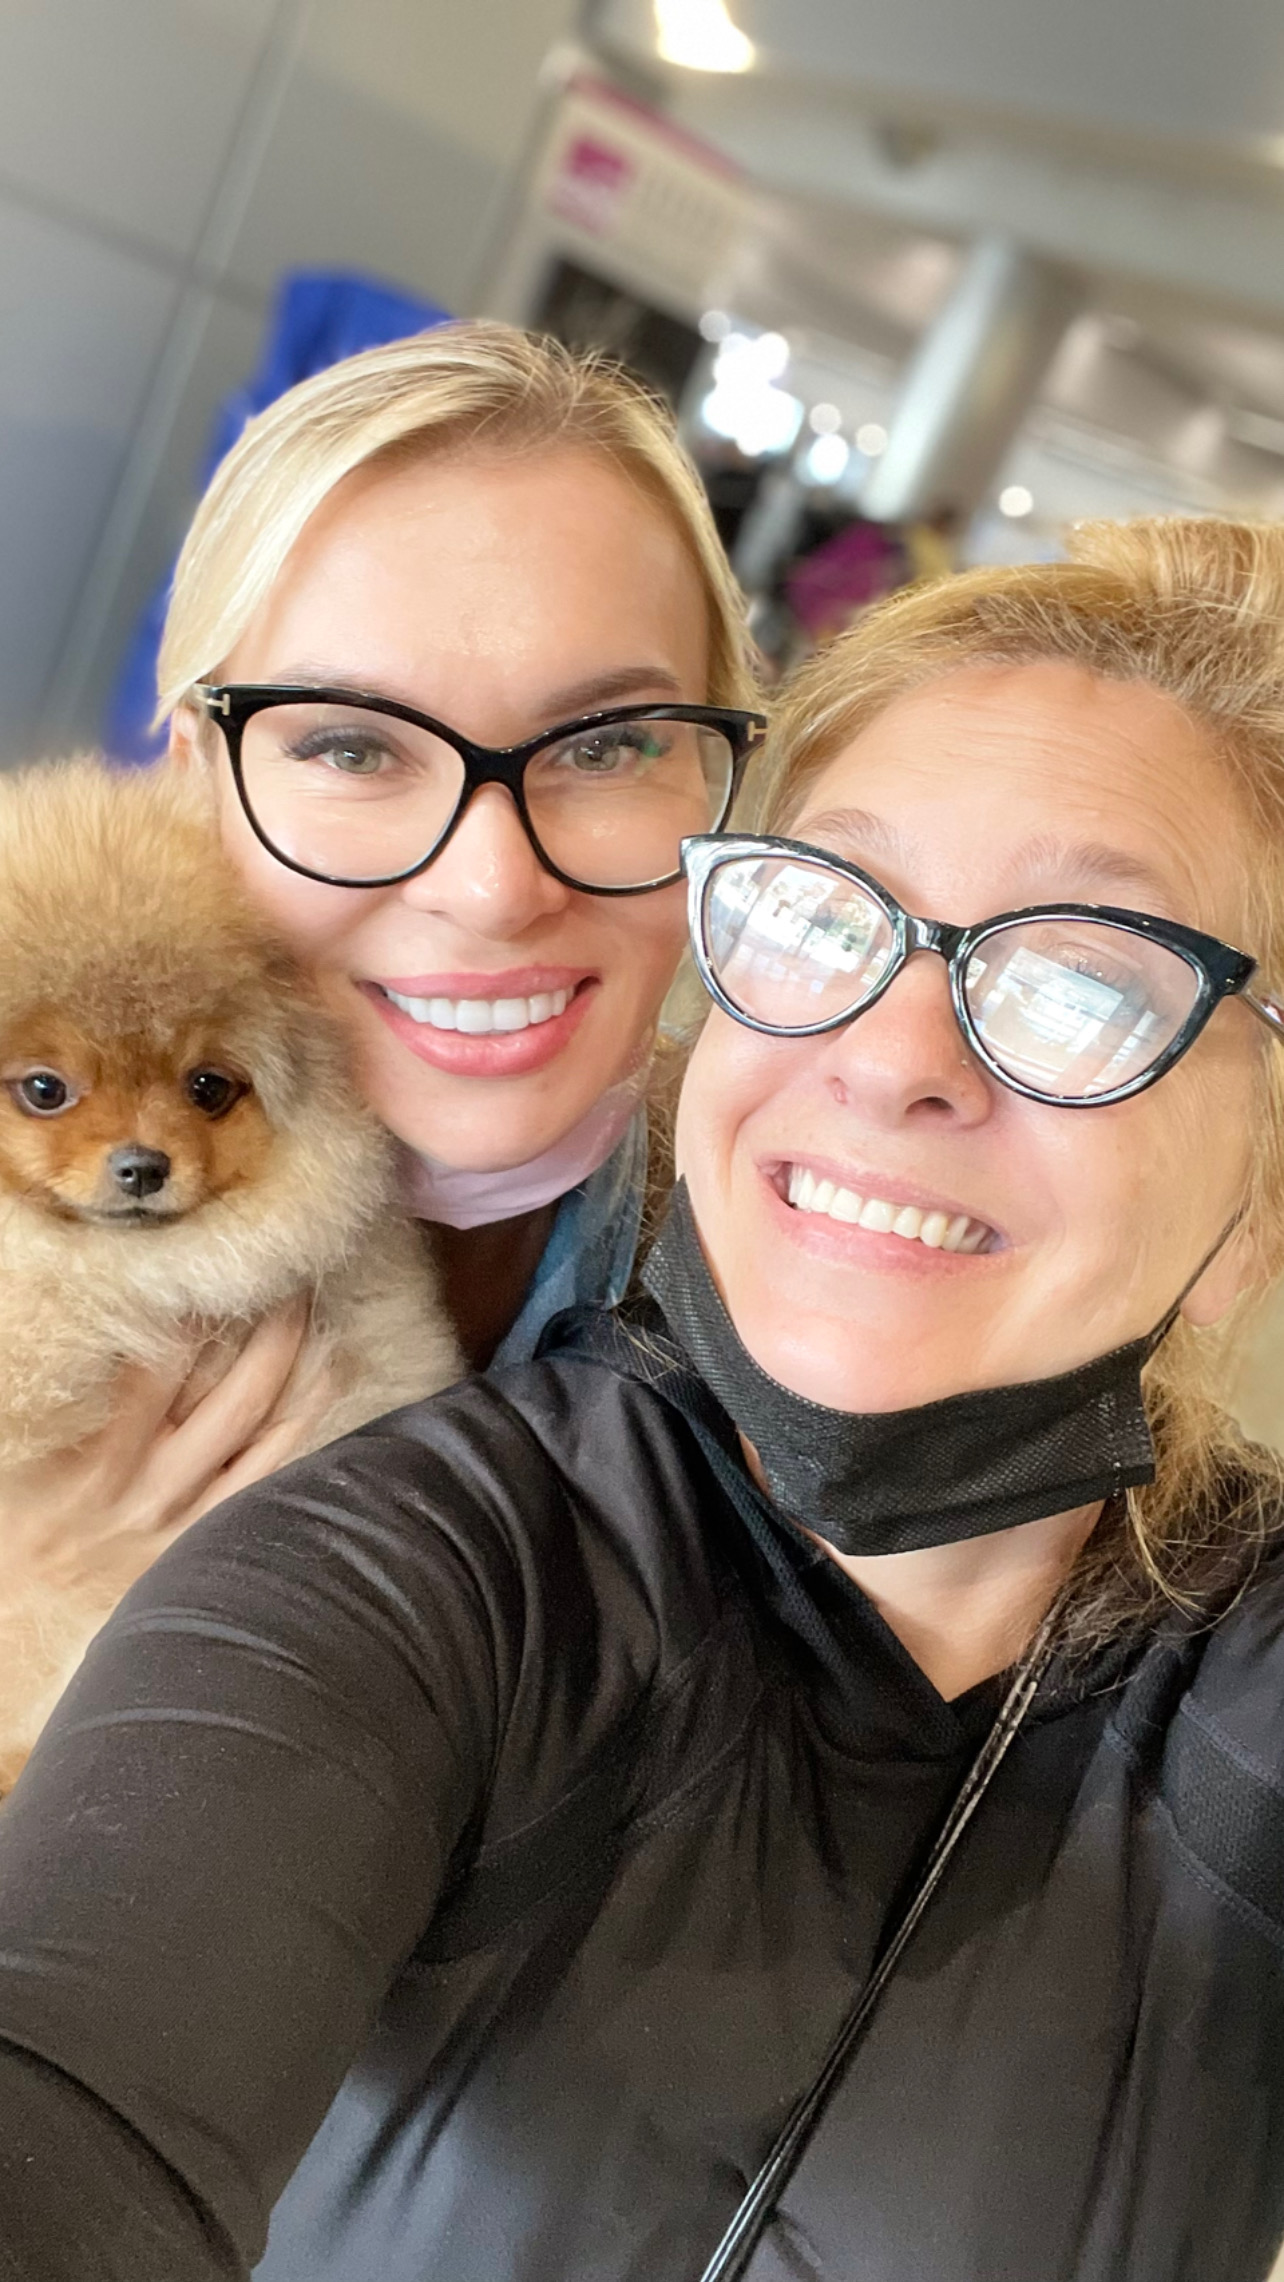 Flight Pet Nanny transporting a Pomeranians from Miami to the World Dog Show in Brno Czech Republic